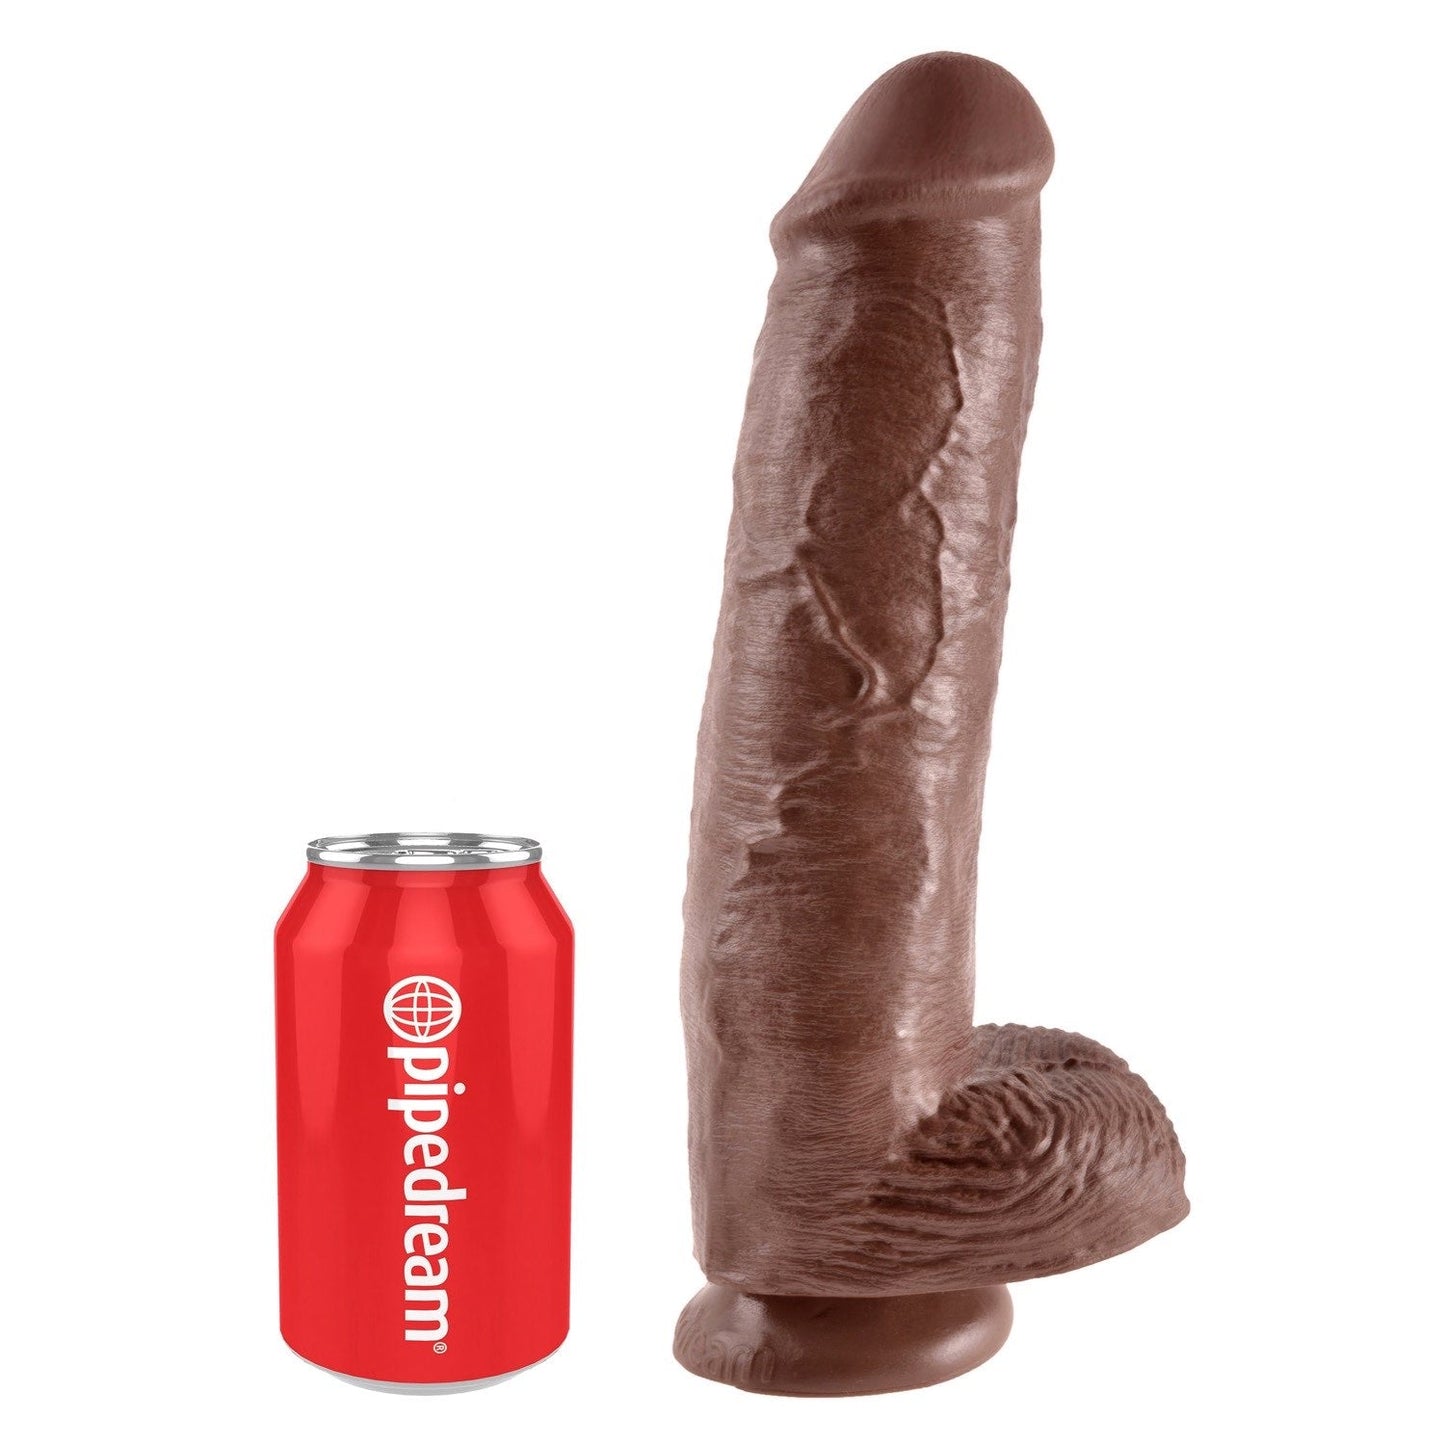 11" Cock With Balls - Brown 28 cm (11") Dong